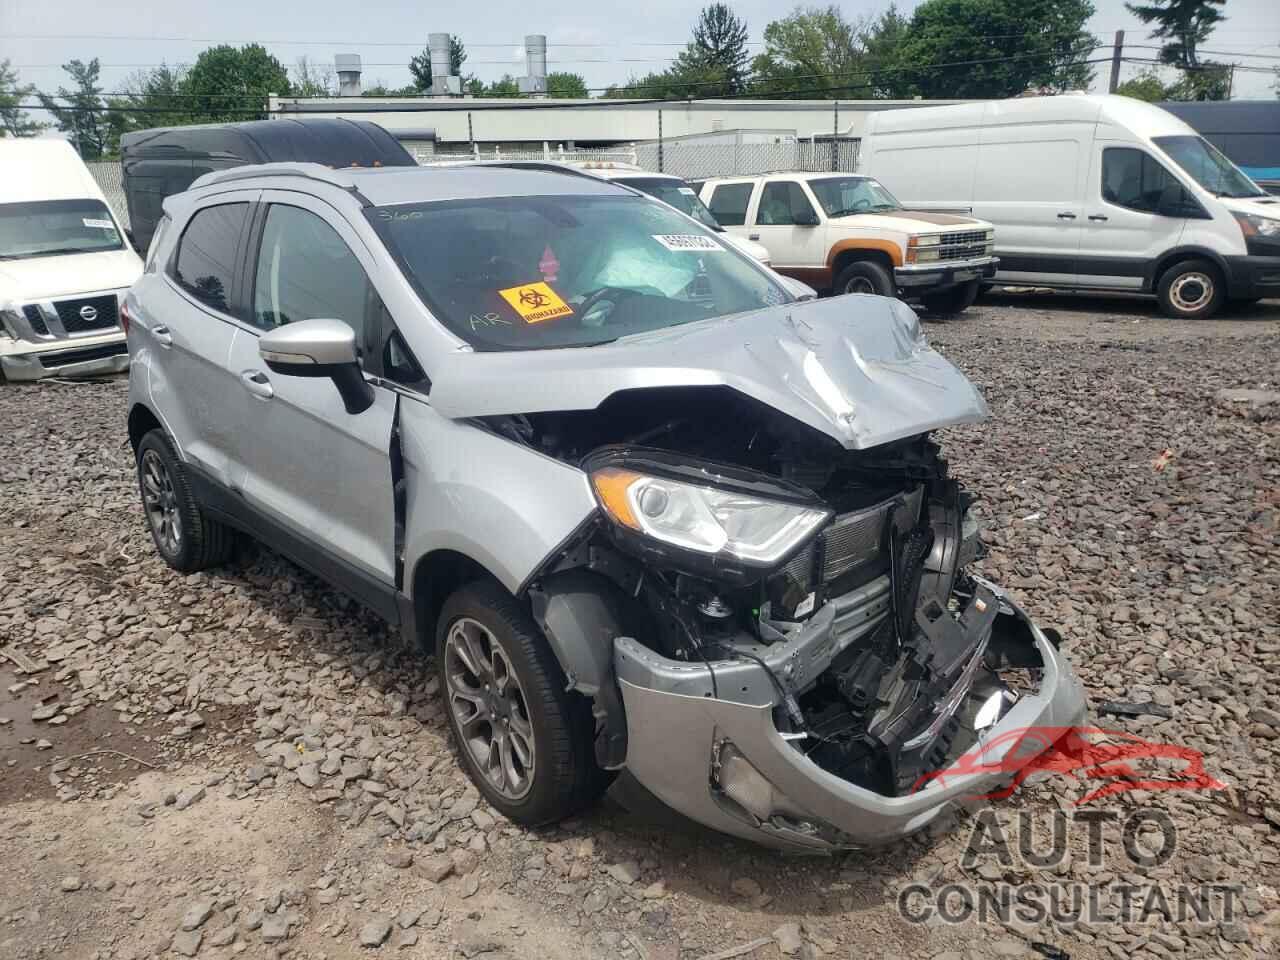 FORD ALL OTHER 2020 - MAJ6S3KL3LC389402